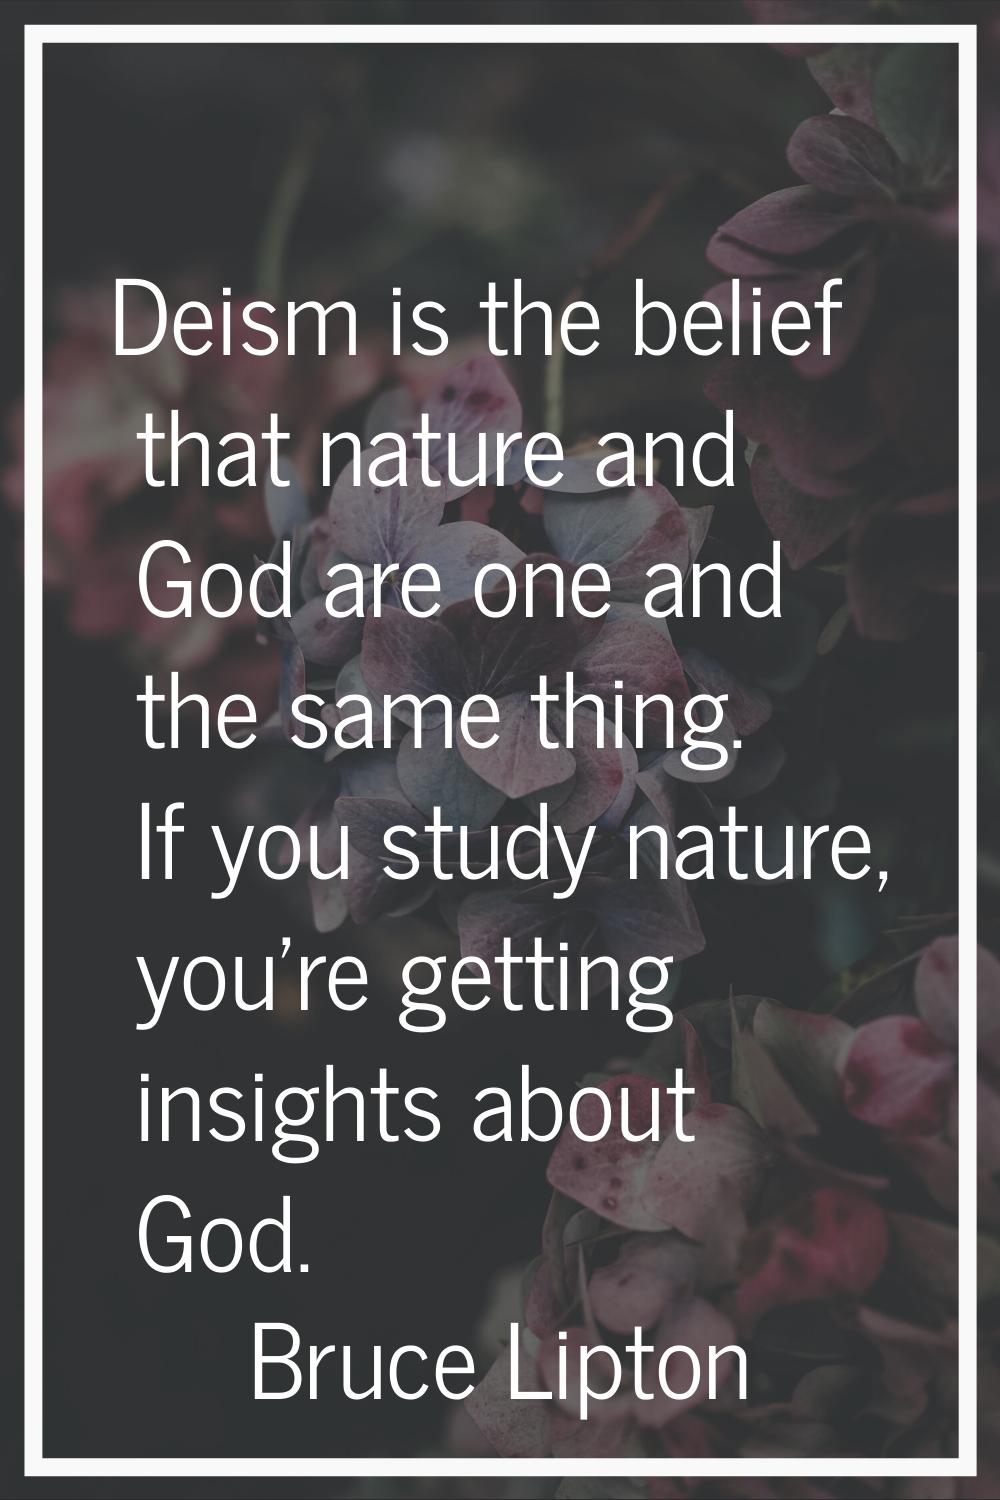 Deism is the belief that nature and God are one and the same thing. If you study nature, you're get